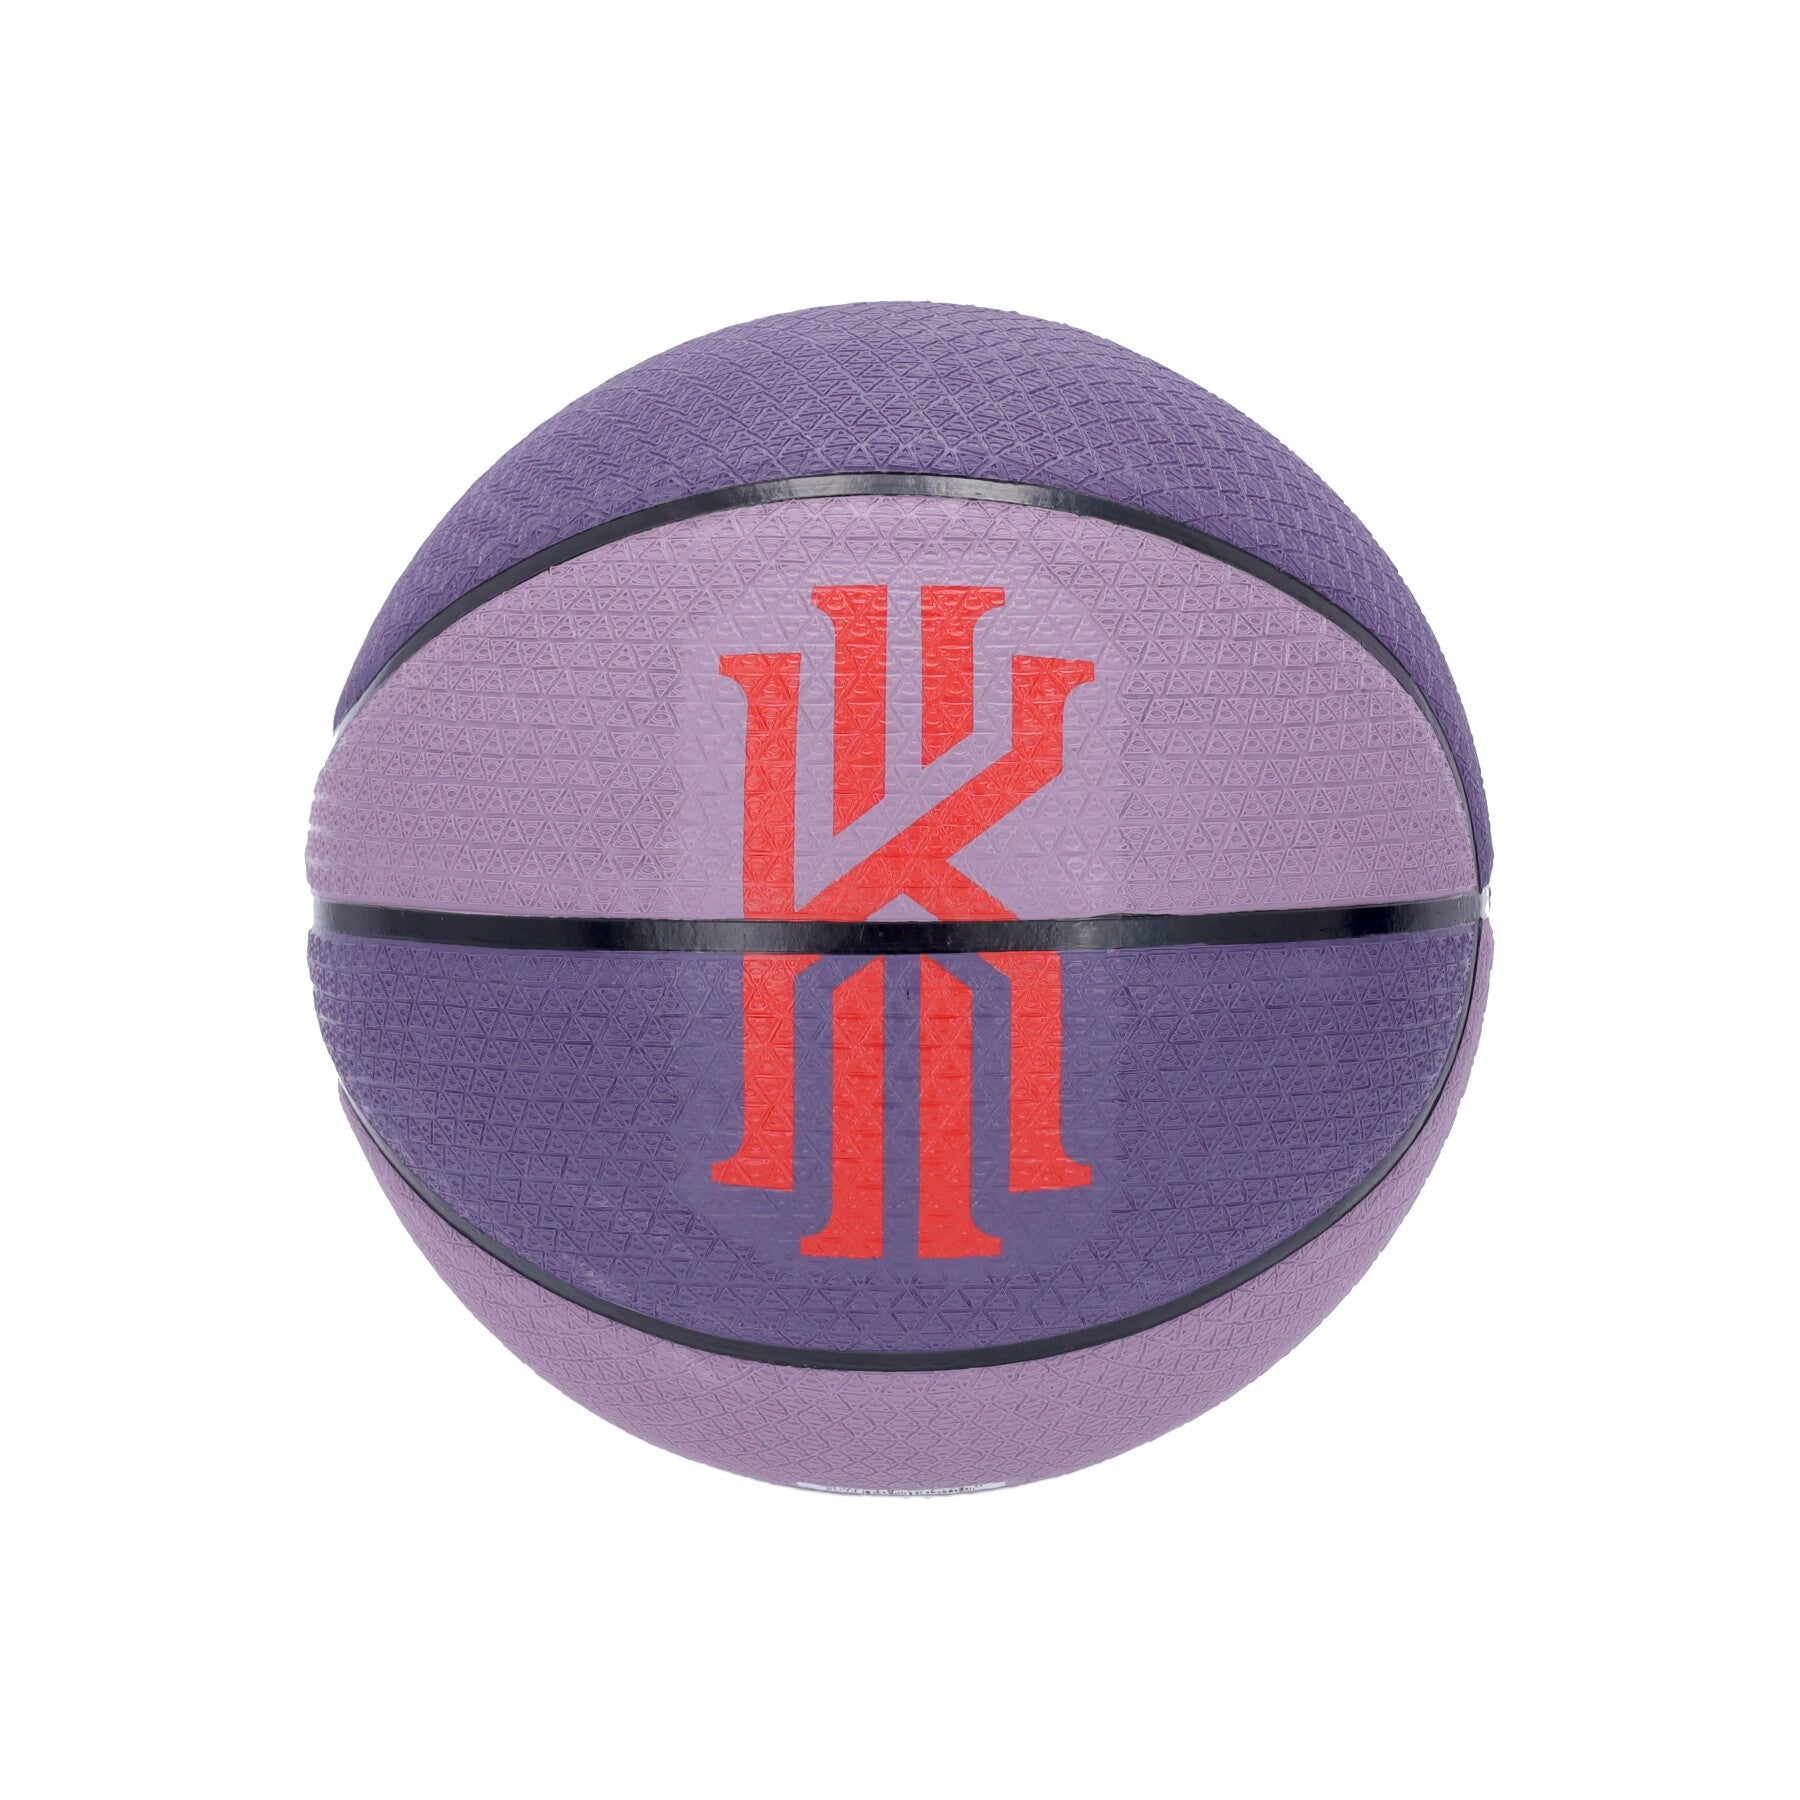 Nike Nba, Pallone Uomo Kyrie Playground Size 07, Canyon Purple/amethyst Wave/black/chile Red